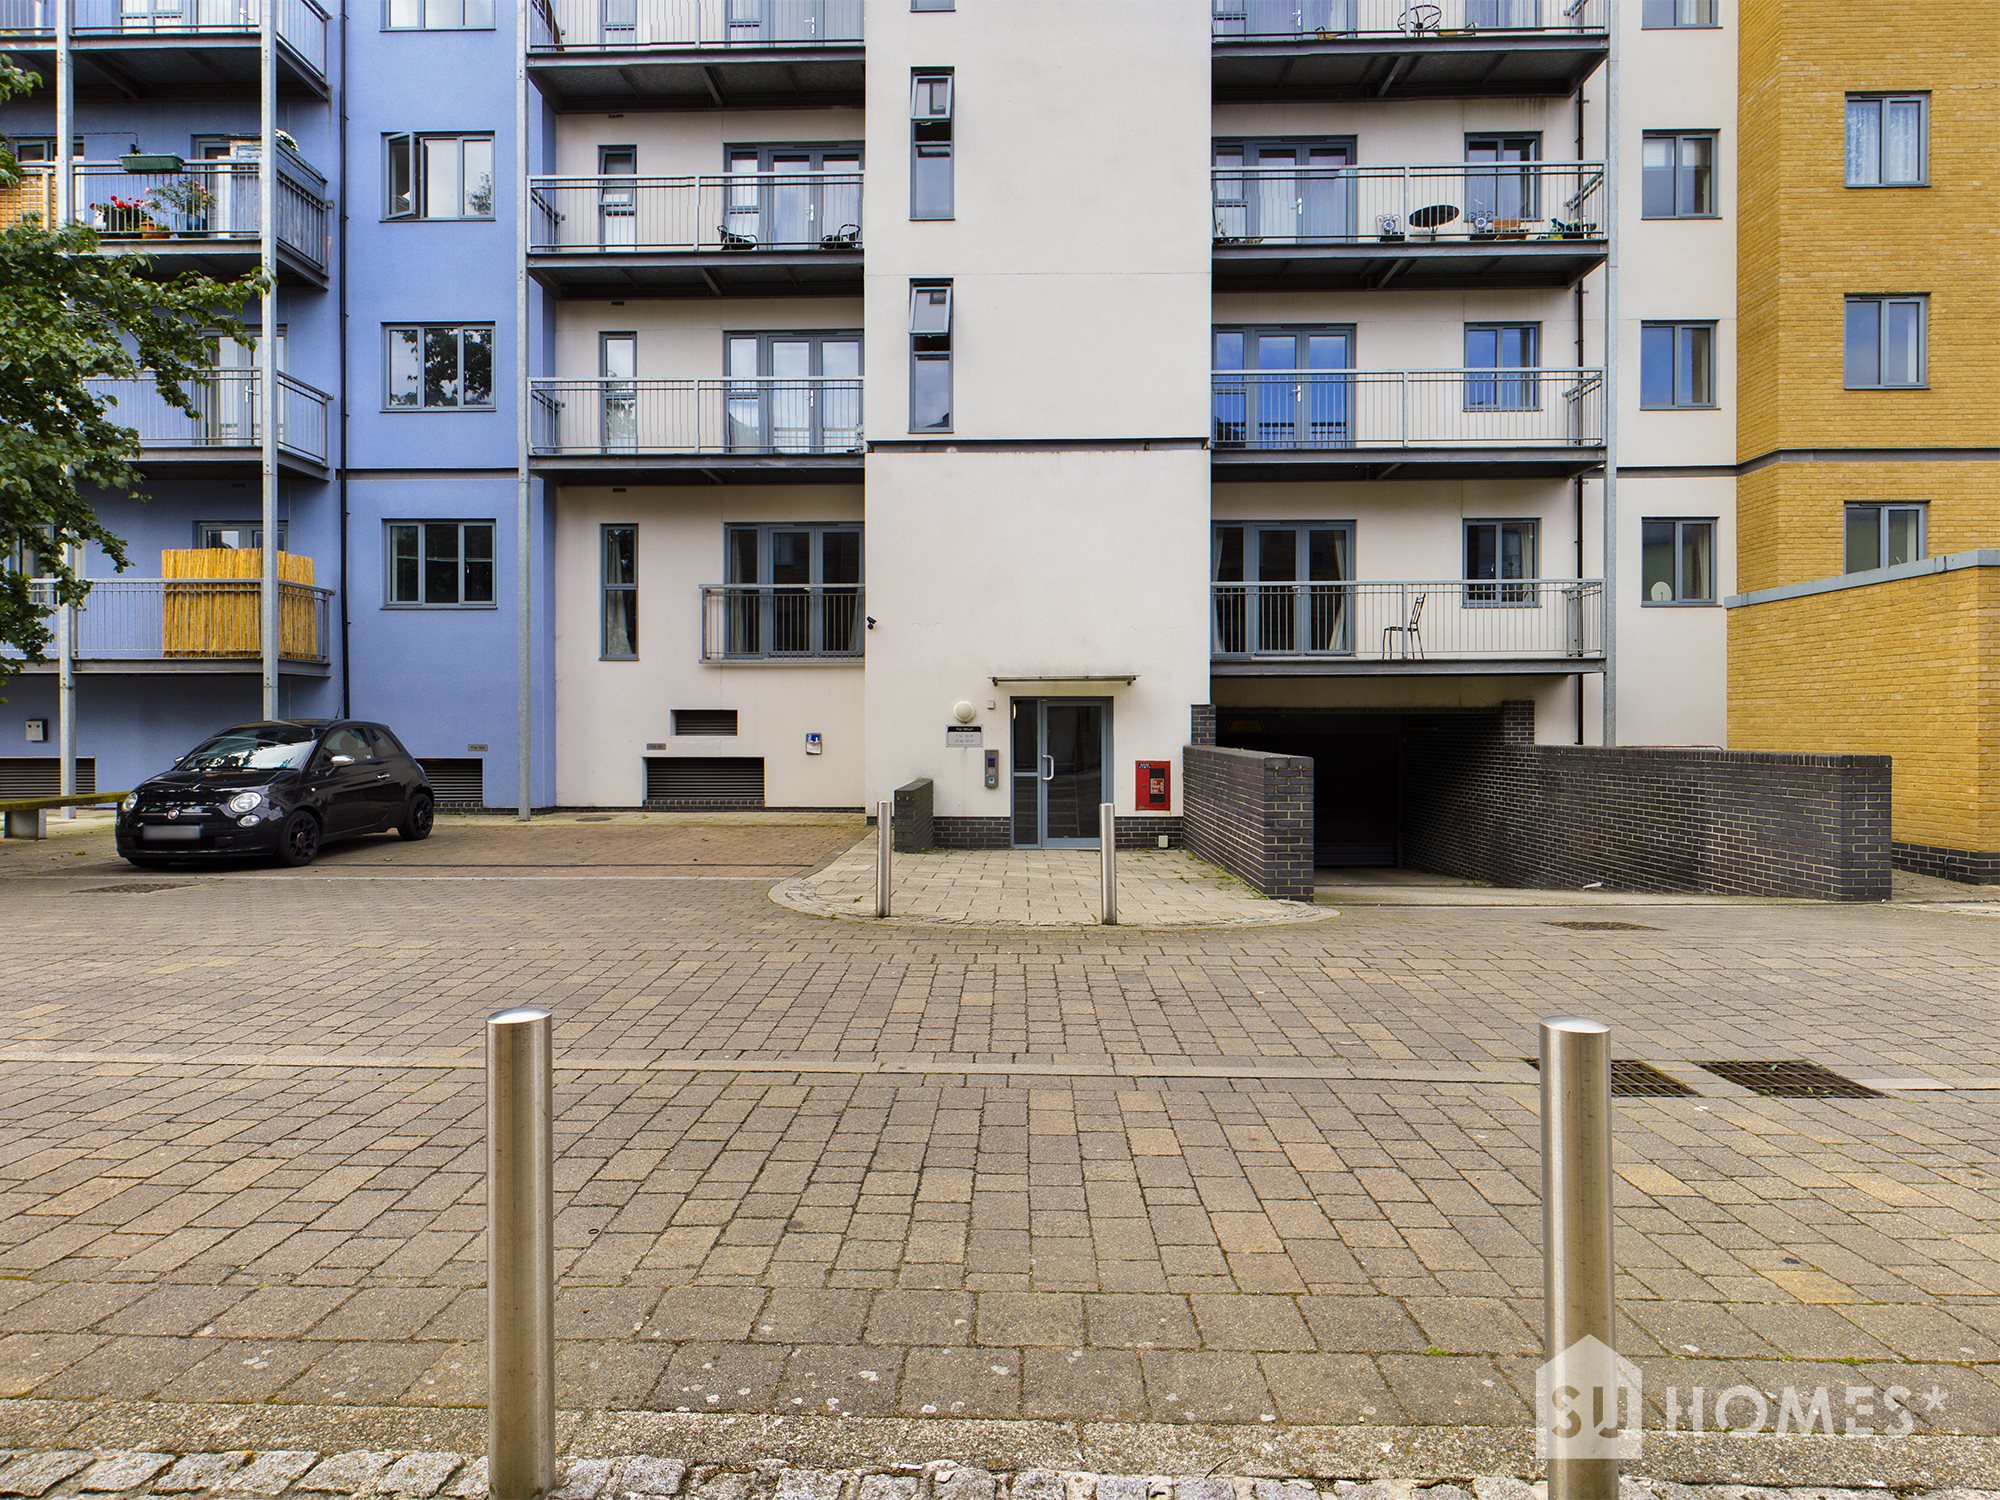 2 bed flat to rent in Pier Wharf, Colchester, CO2 